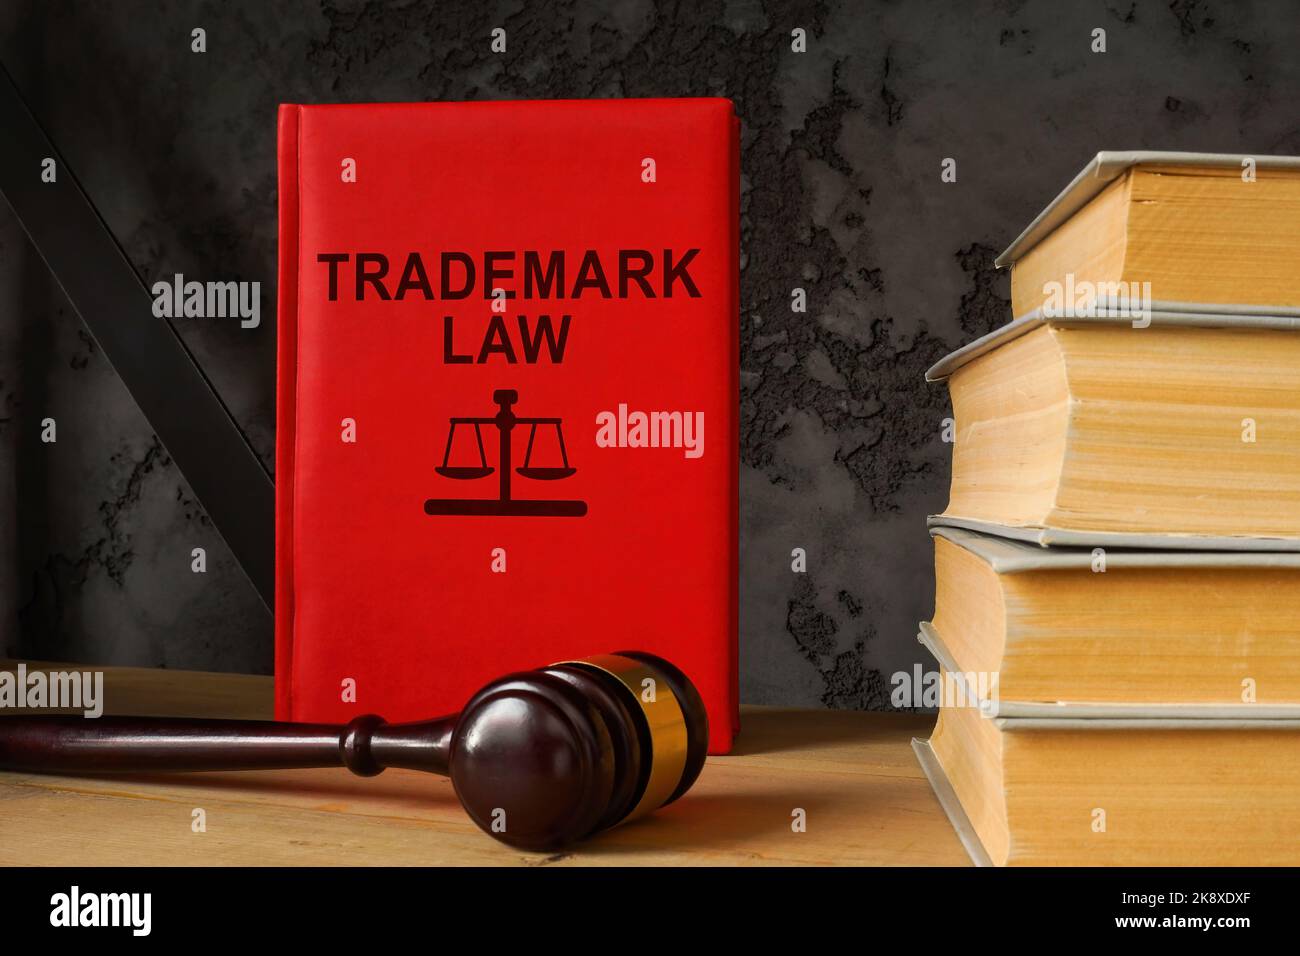 Trademark law and gavel is on the shelf. Stock Photo